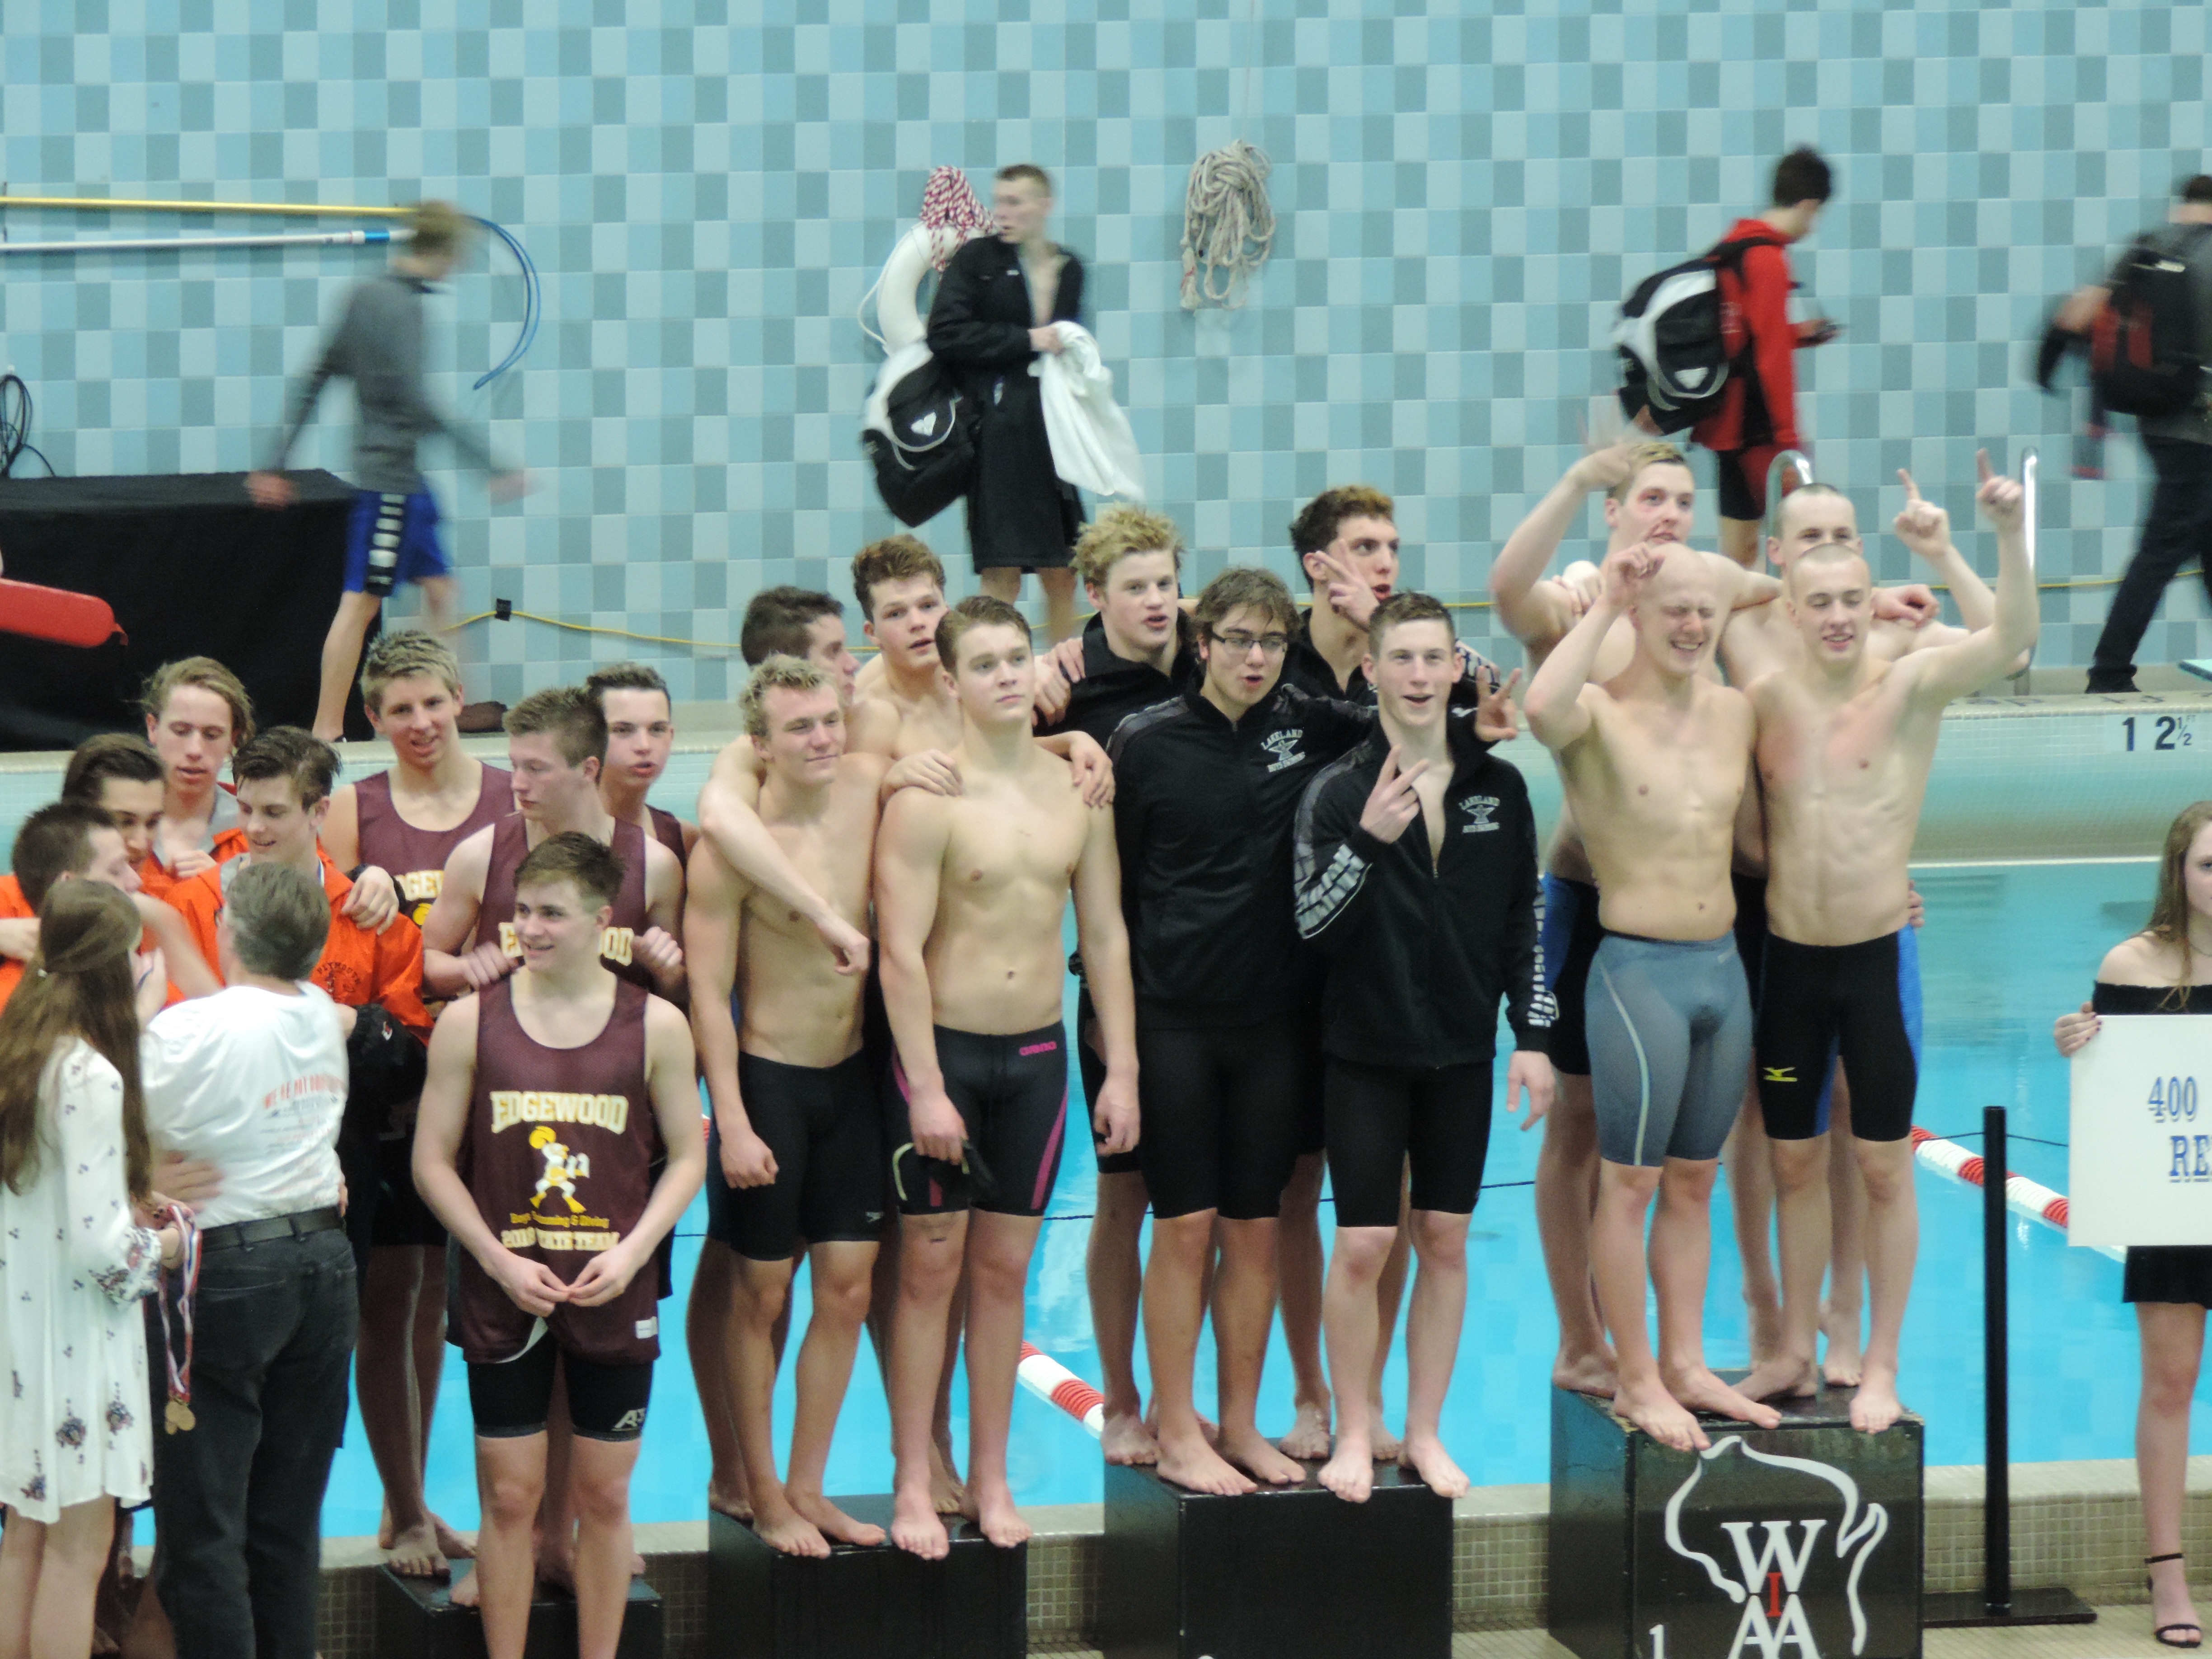 Jaguars Roundup (Swimming and Basketball): Jaguars swim team finishes 3rd at State